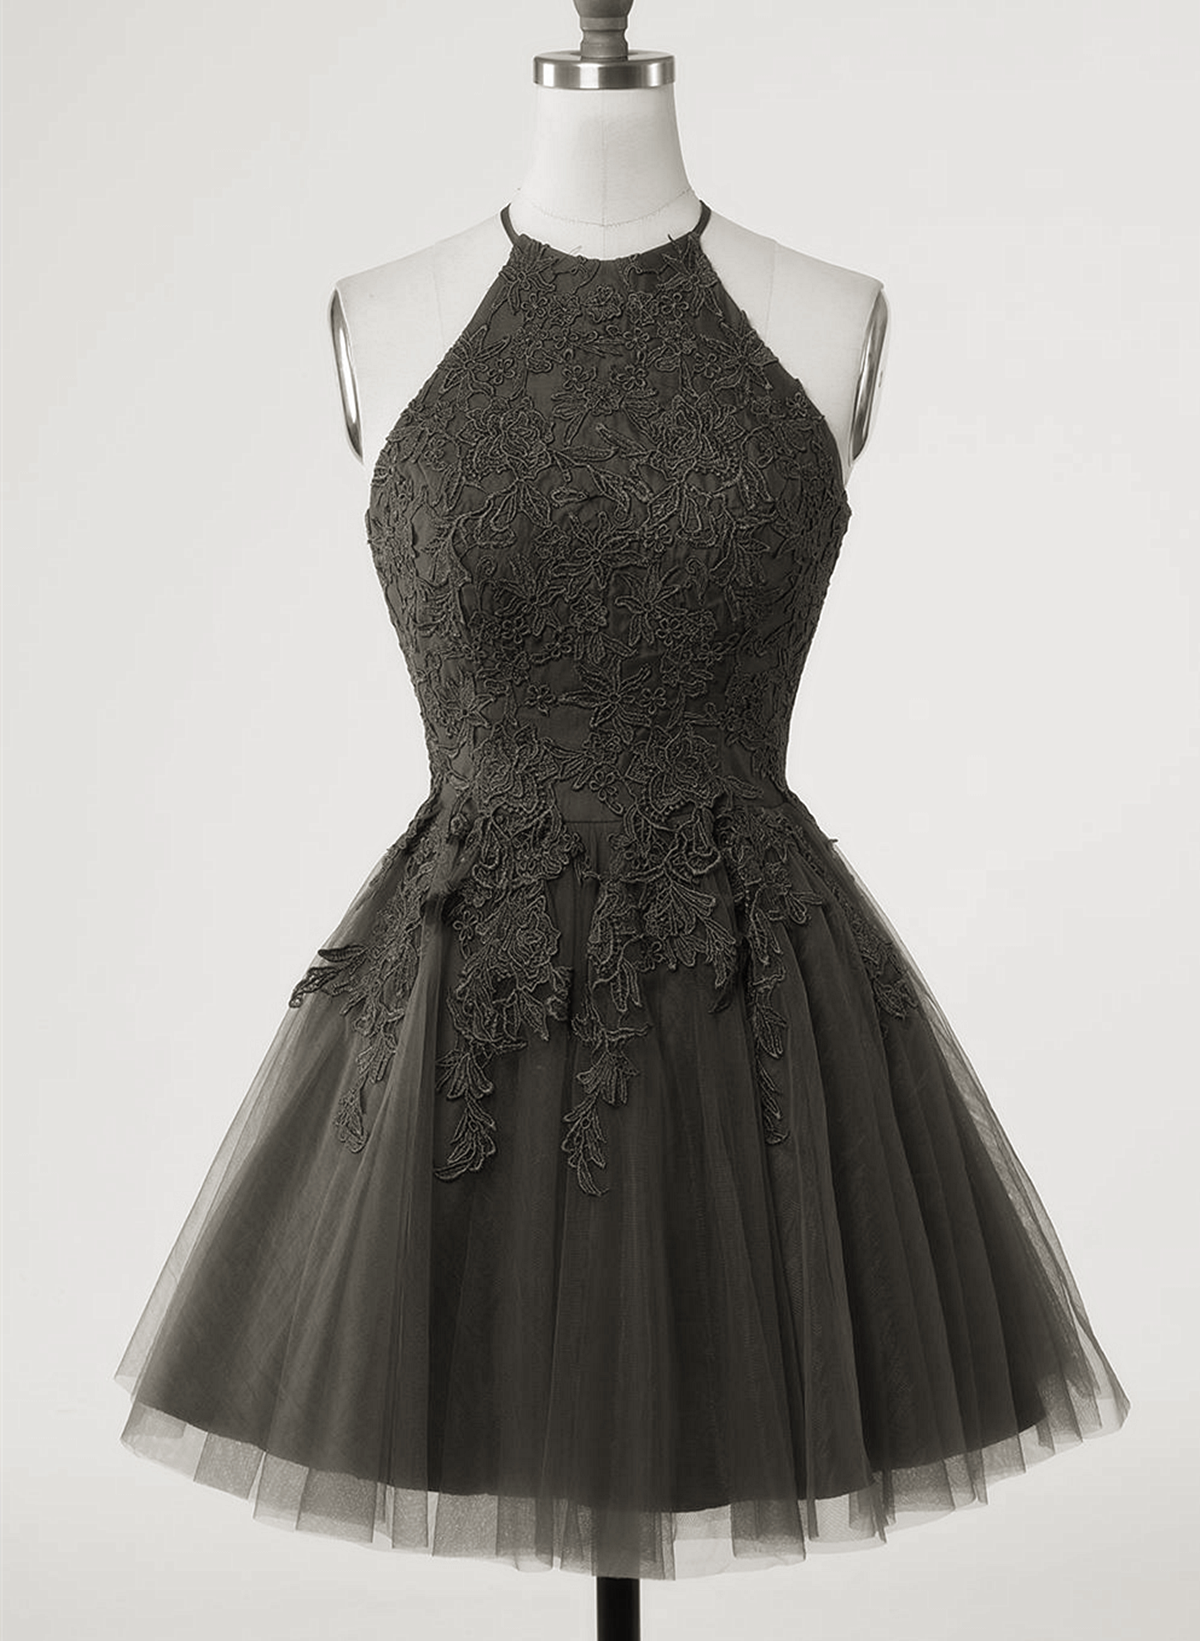 Black Halter Tulle With Lace Short Party Dress, Black Tulle Corset Homecoming Dress outfit, Black Formal Dress